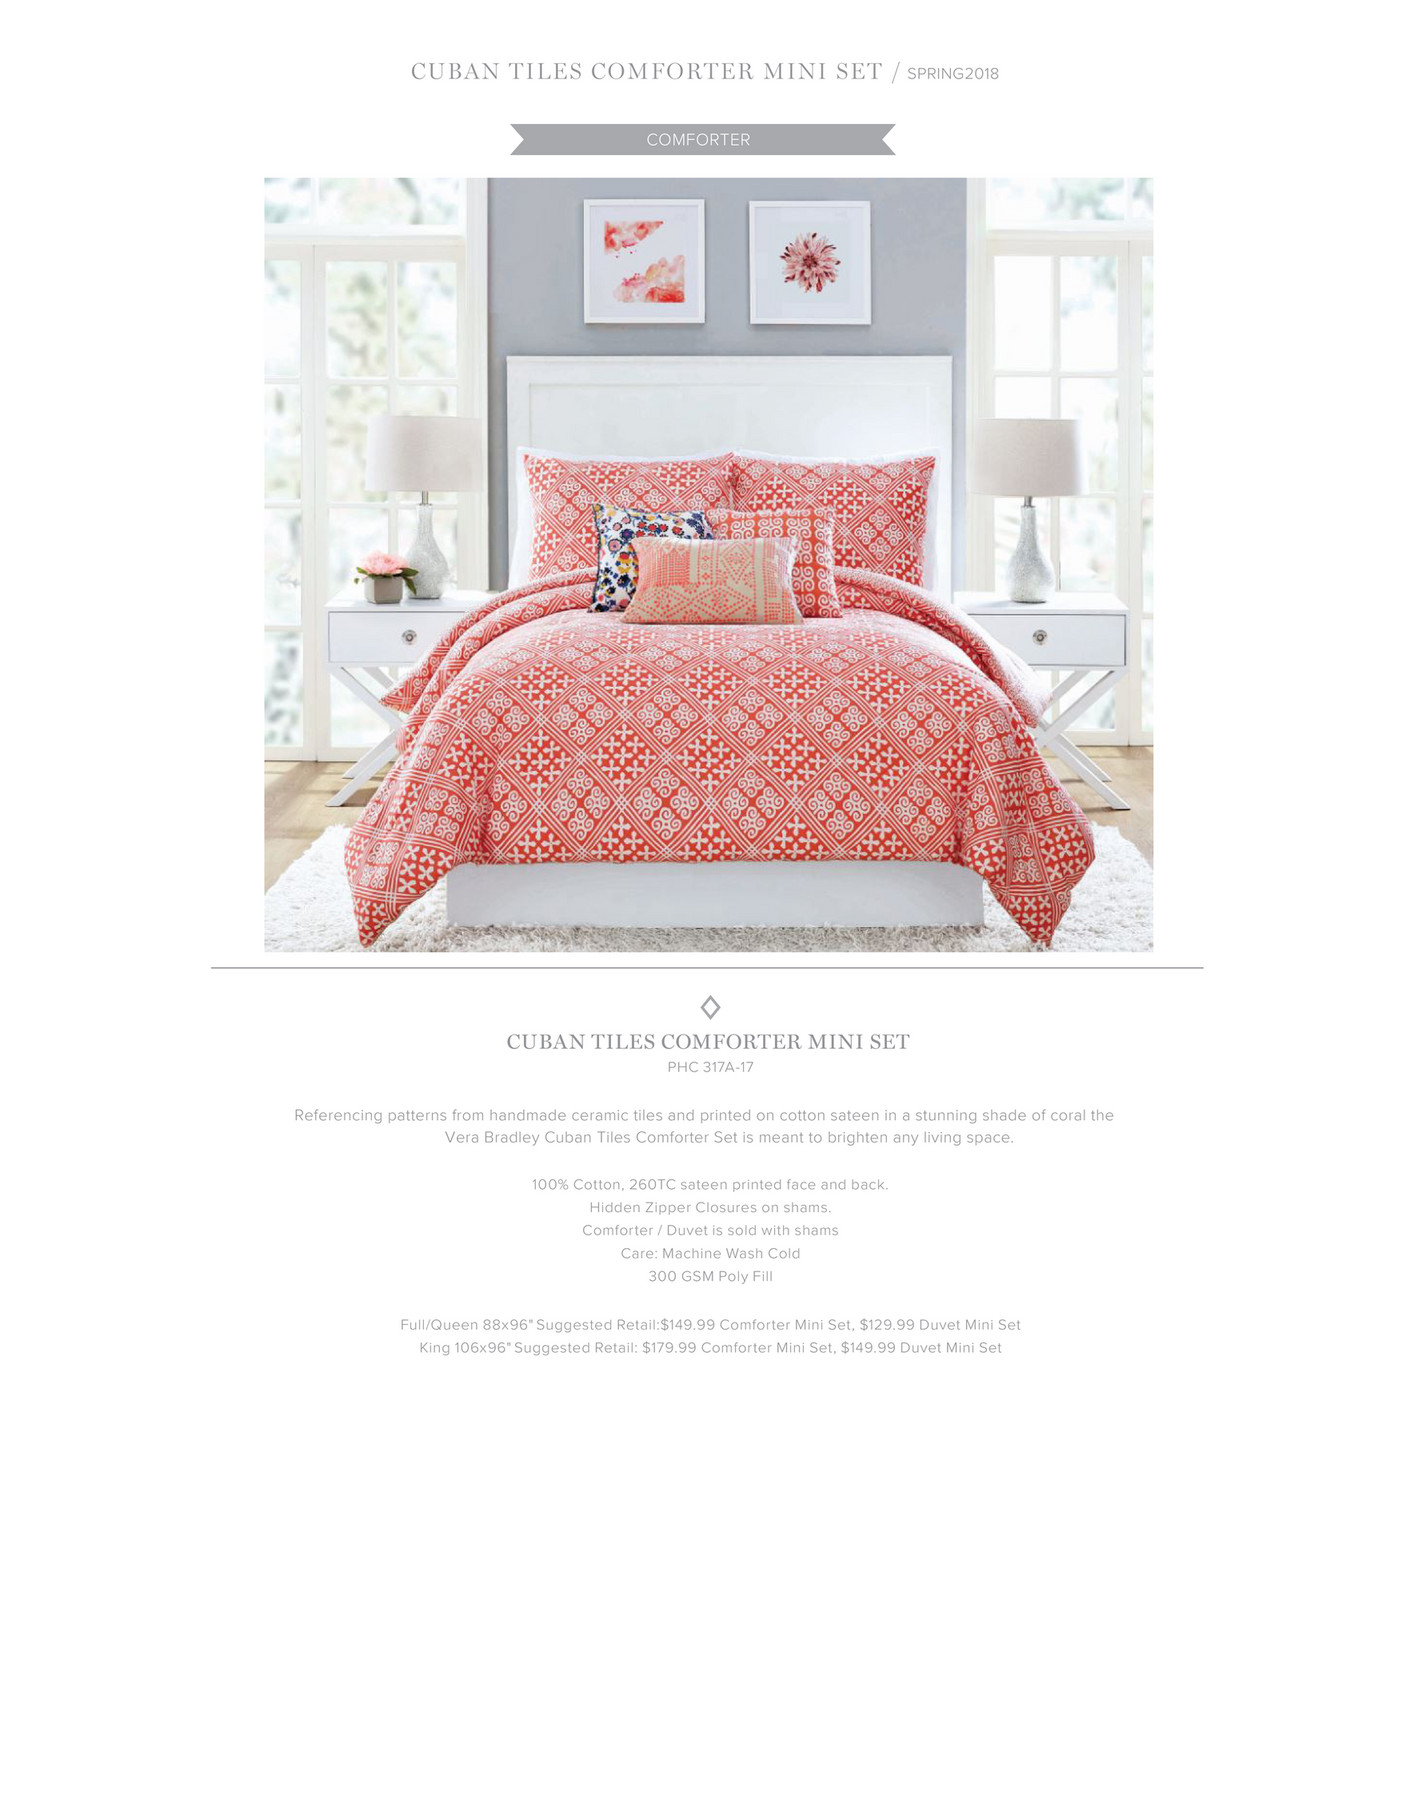 My Publications Vera Bradley Sp18 Bedding Collection Page 2